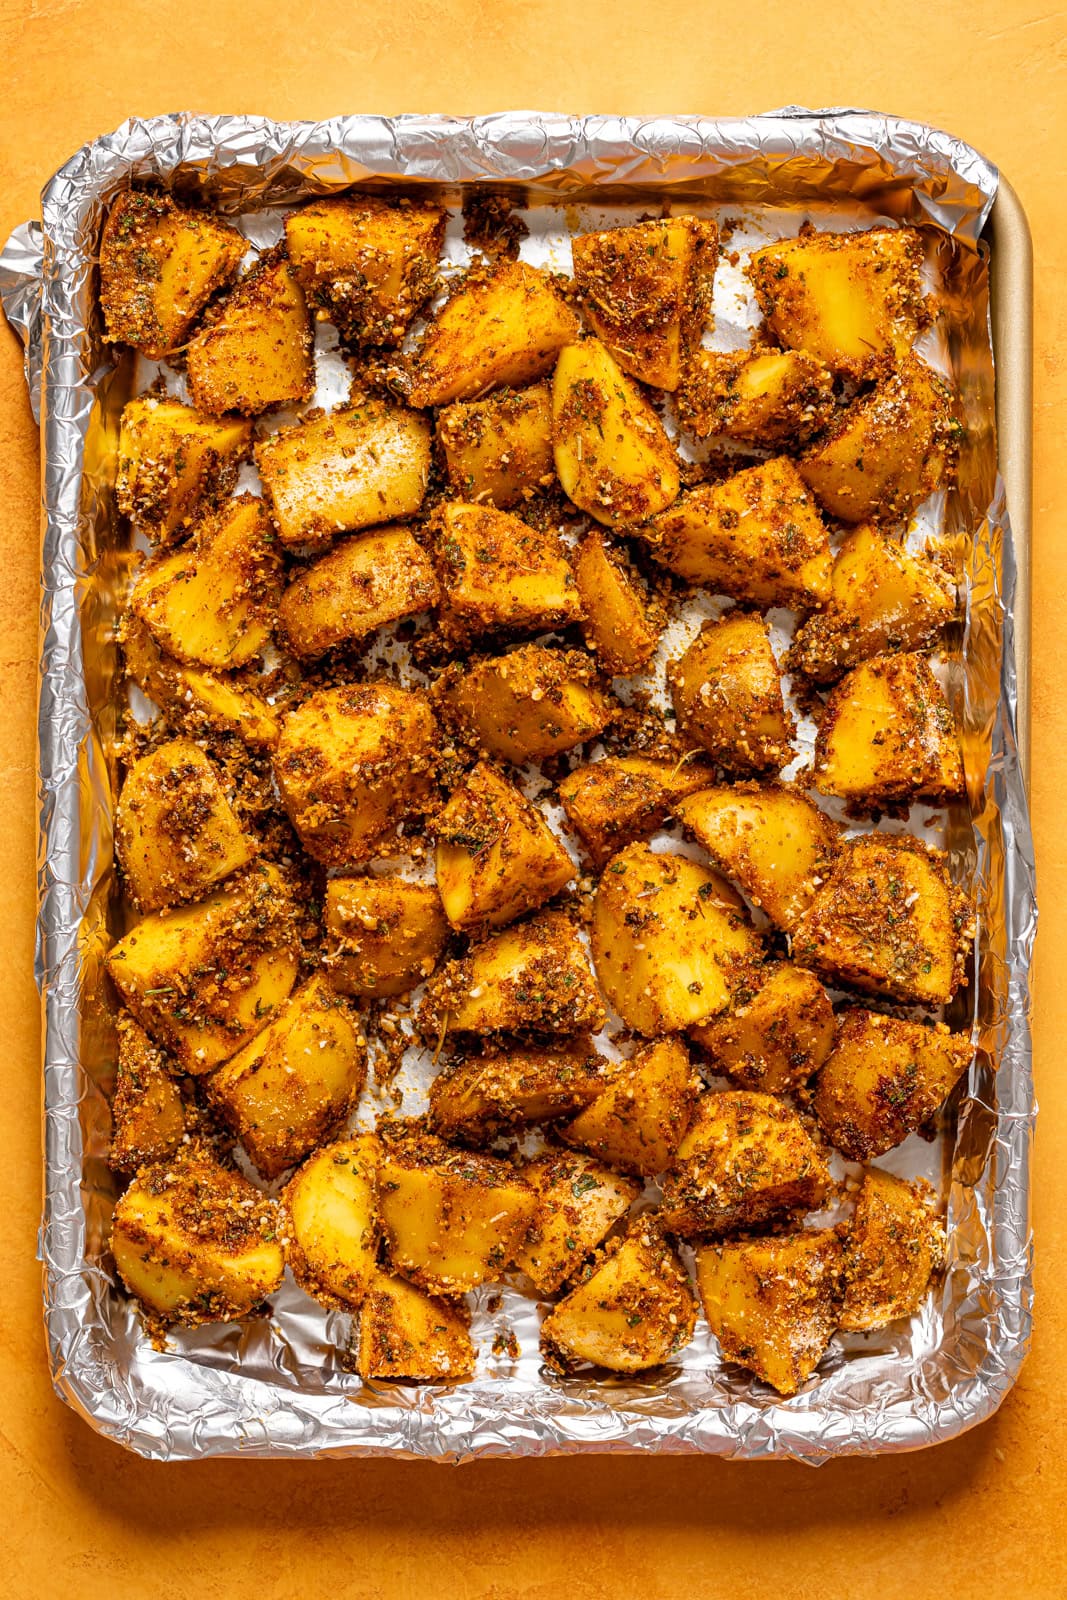 Coated potatoes on a baking sheet lined with foil.